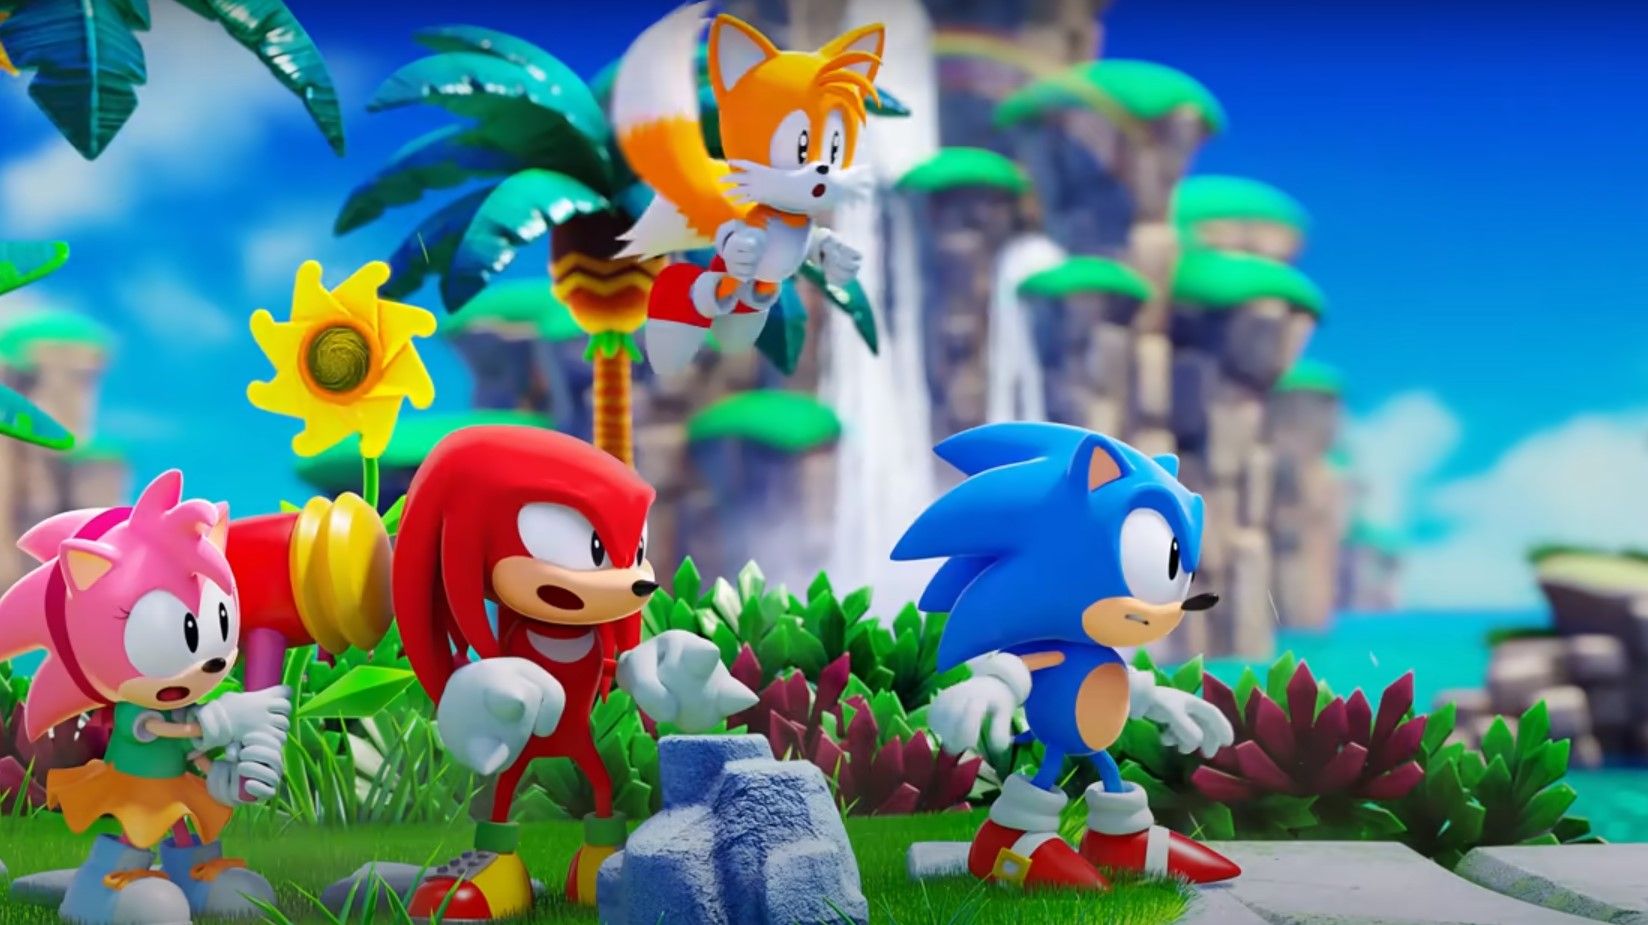 Sonic Frontiers Achieves Highest Metacritic User Score For The